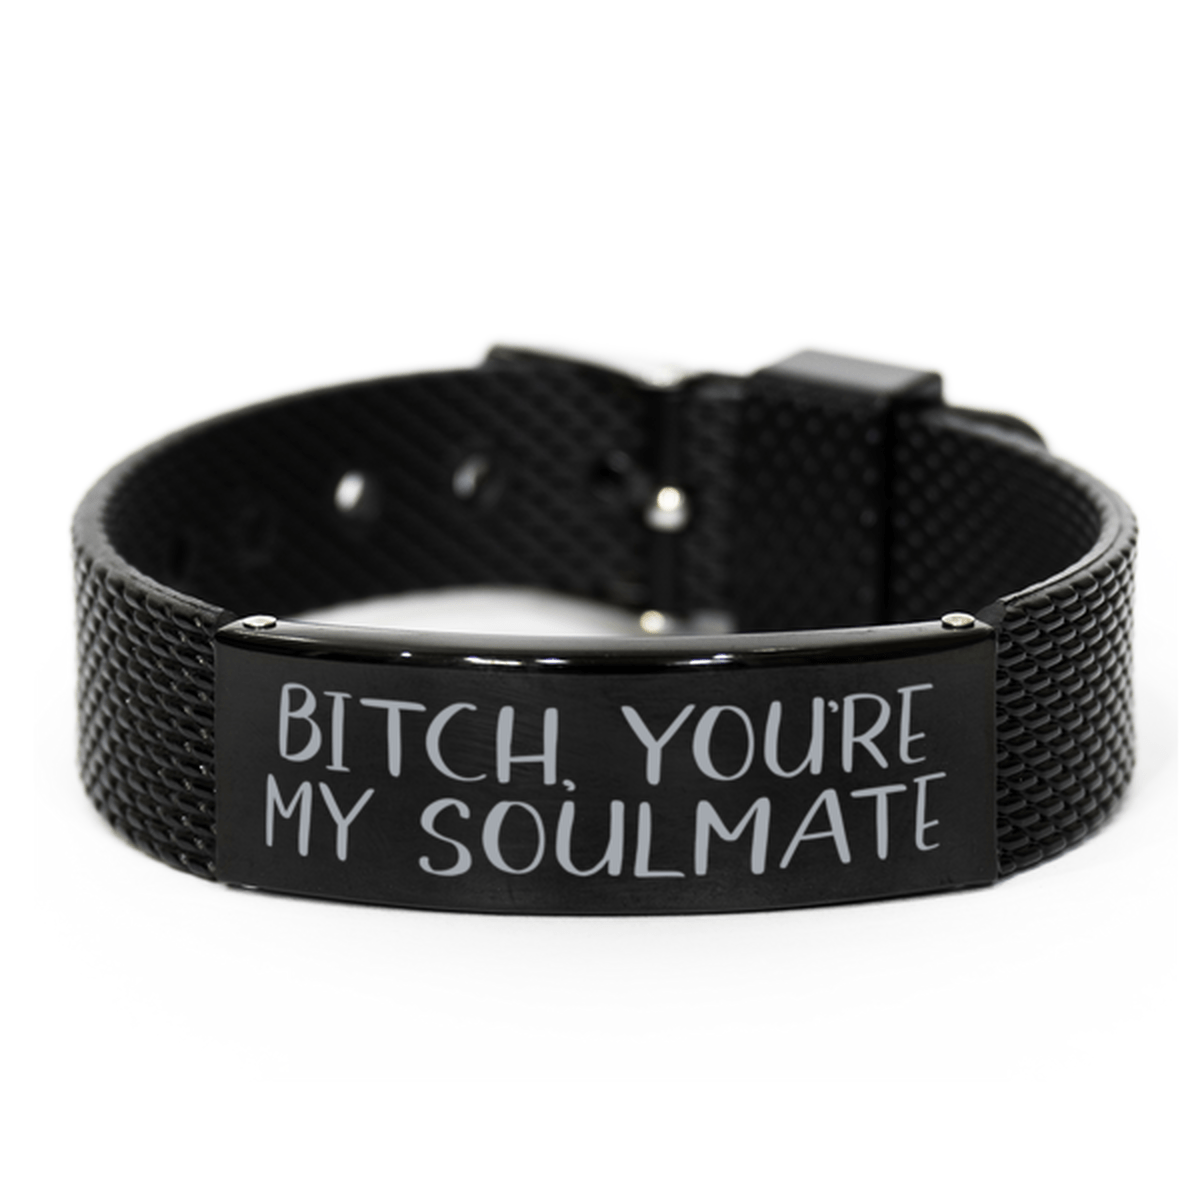 Bitch You're My Soulmate - Unbiological Sister Gift - Black Shark Mesh Bracelet for Birthday or Christmas - Jewelry Gift for Best Friend, Bestie, BFF